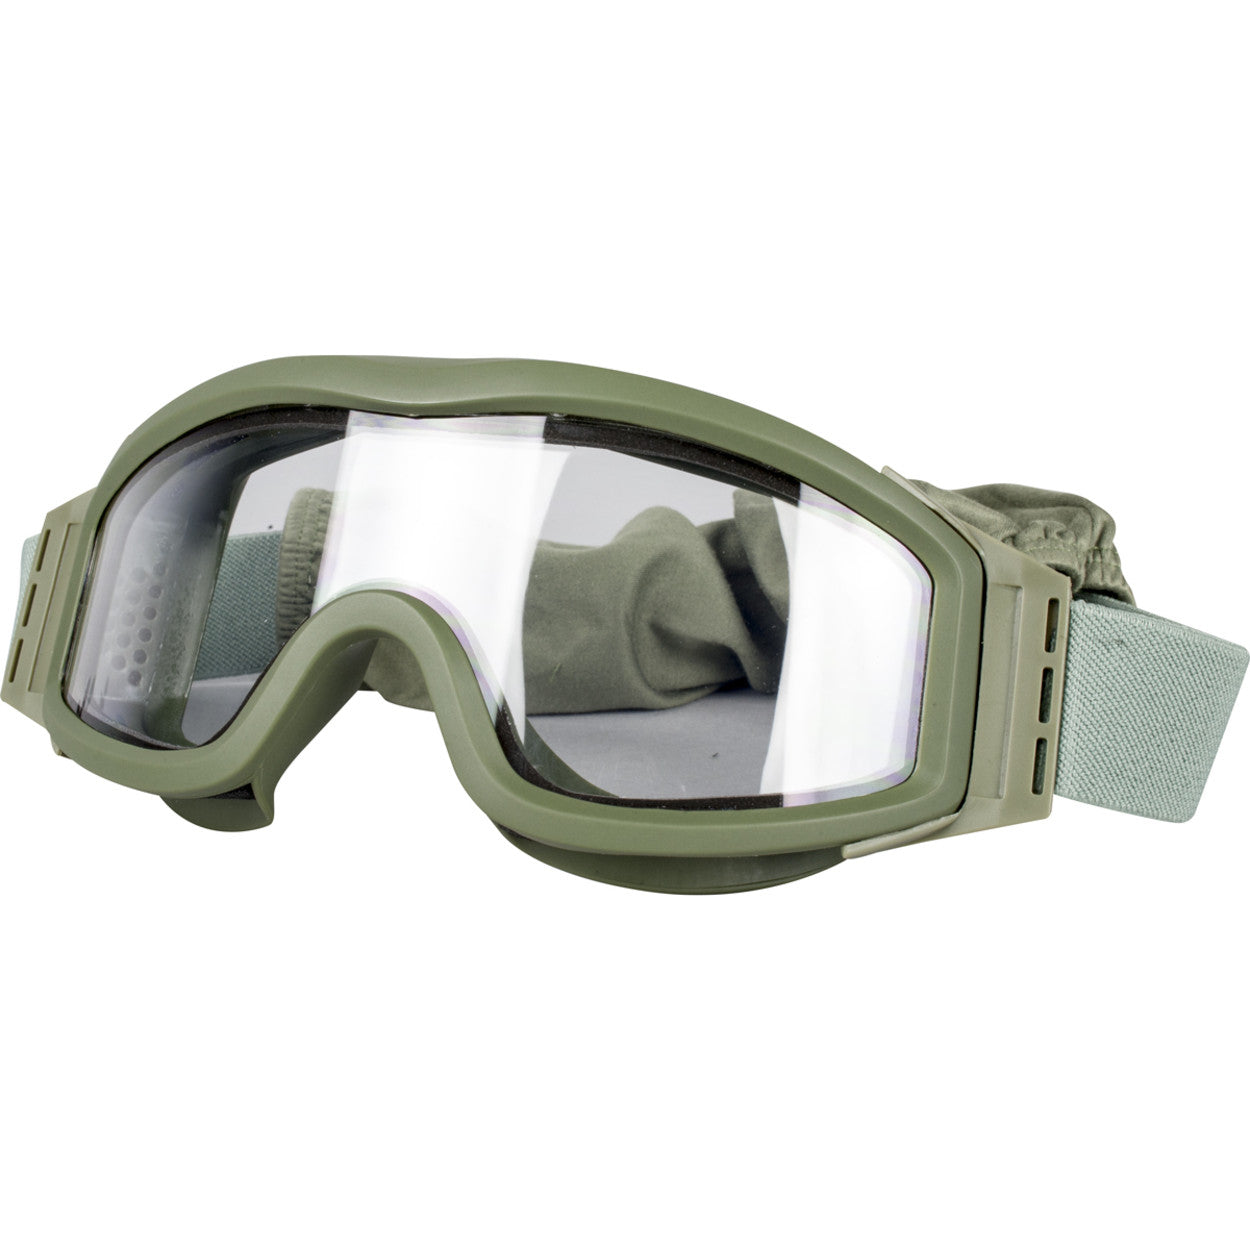 VALKEN - Tango Thermal Goggle Clear Lens